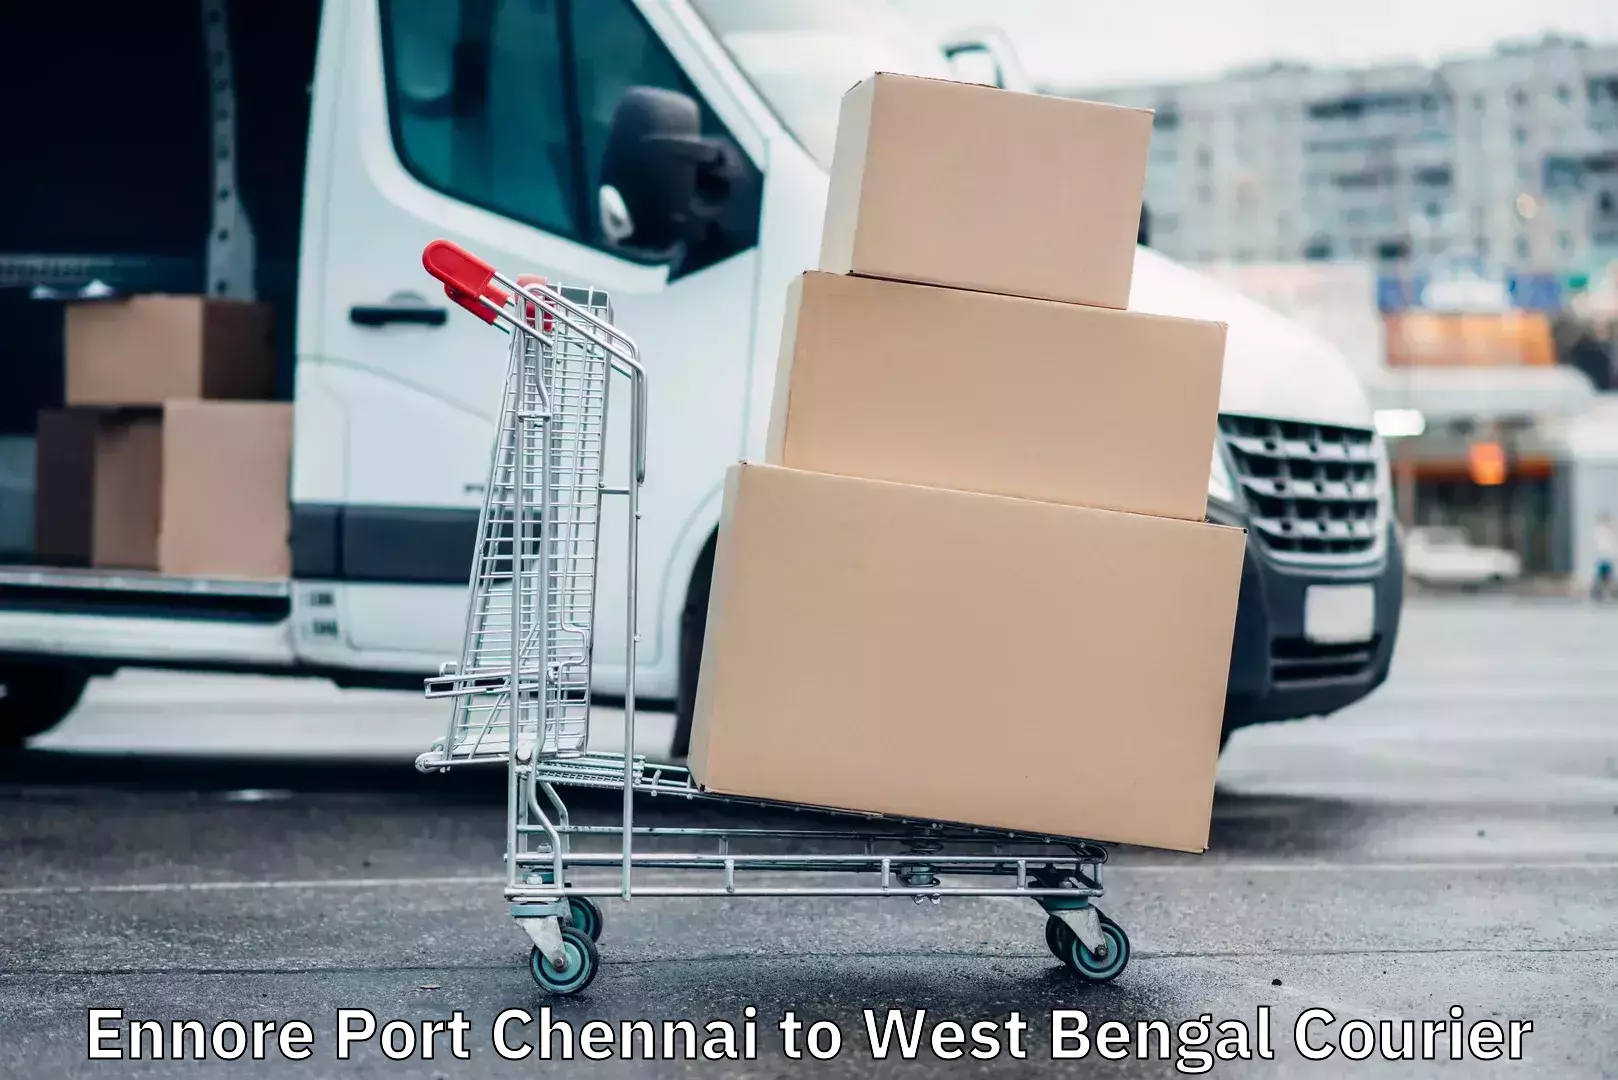 Lightweight parcel options in Ennore Port Chennai to Raidighi